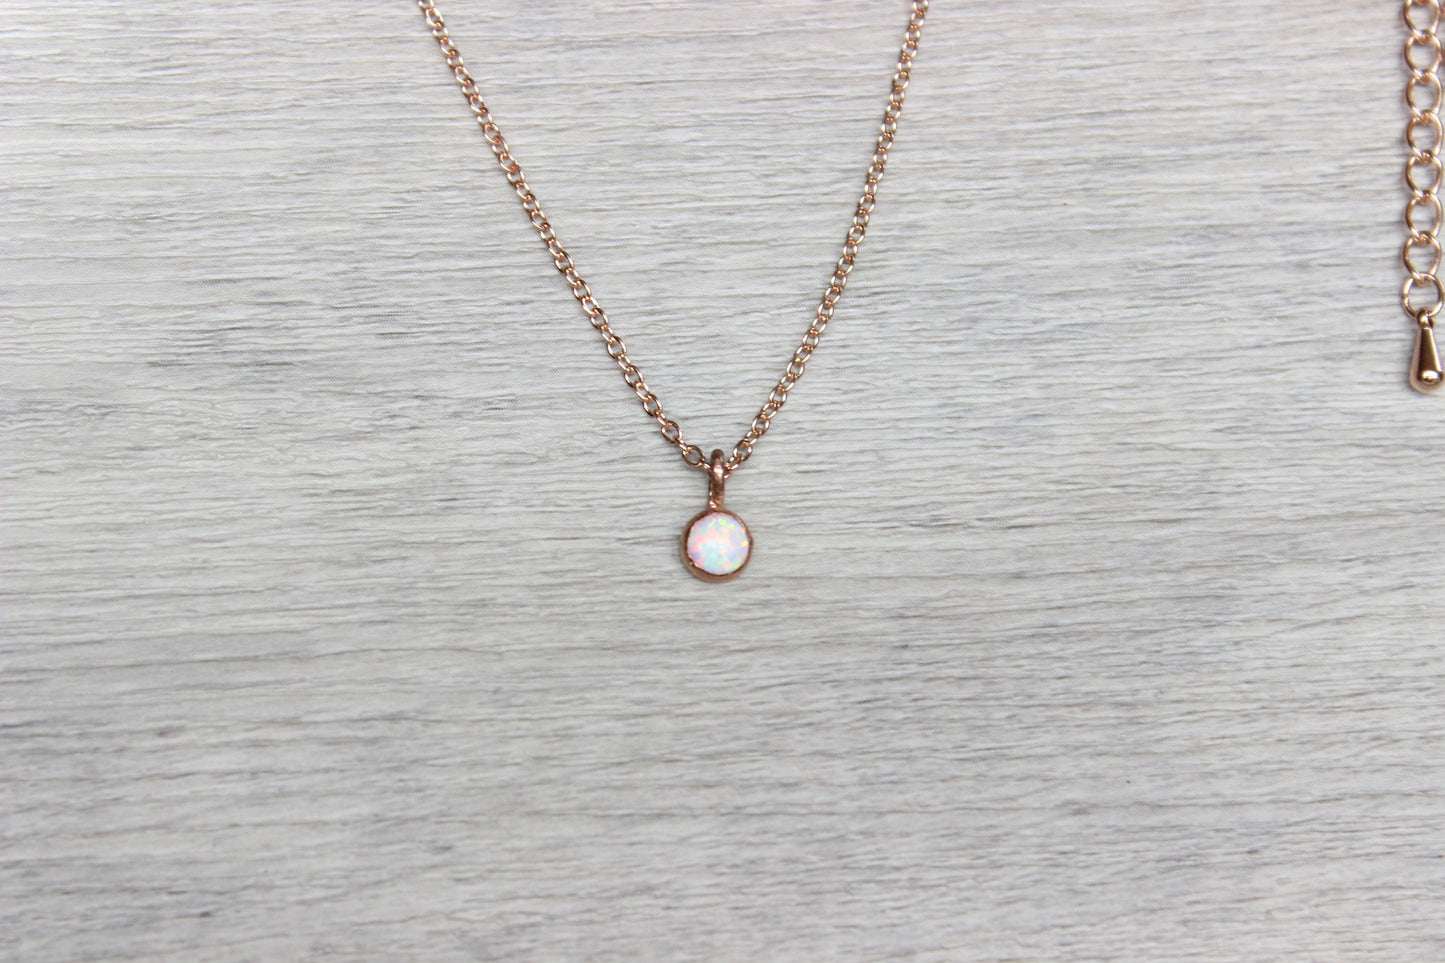 Rose Gold Opal Necklace // White Opal Necklace //  Bridesmaids Gift // October Birthstone Necklace // Rose Gold Gemstone Necklace